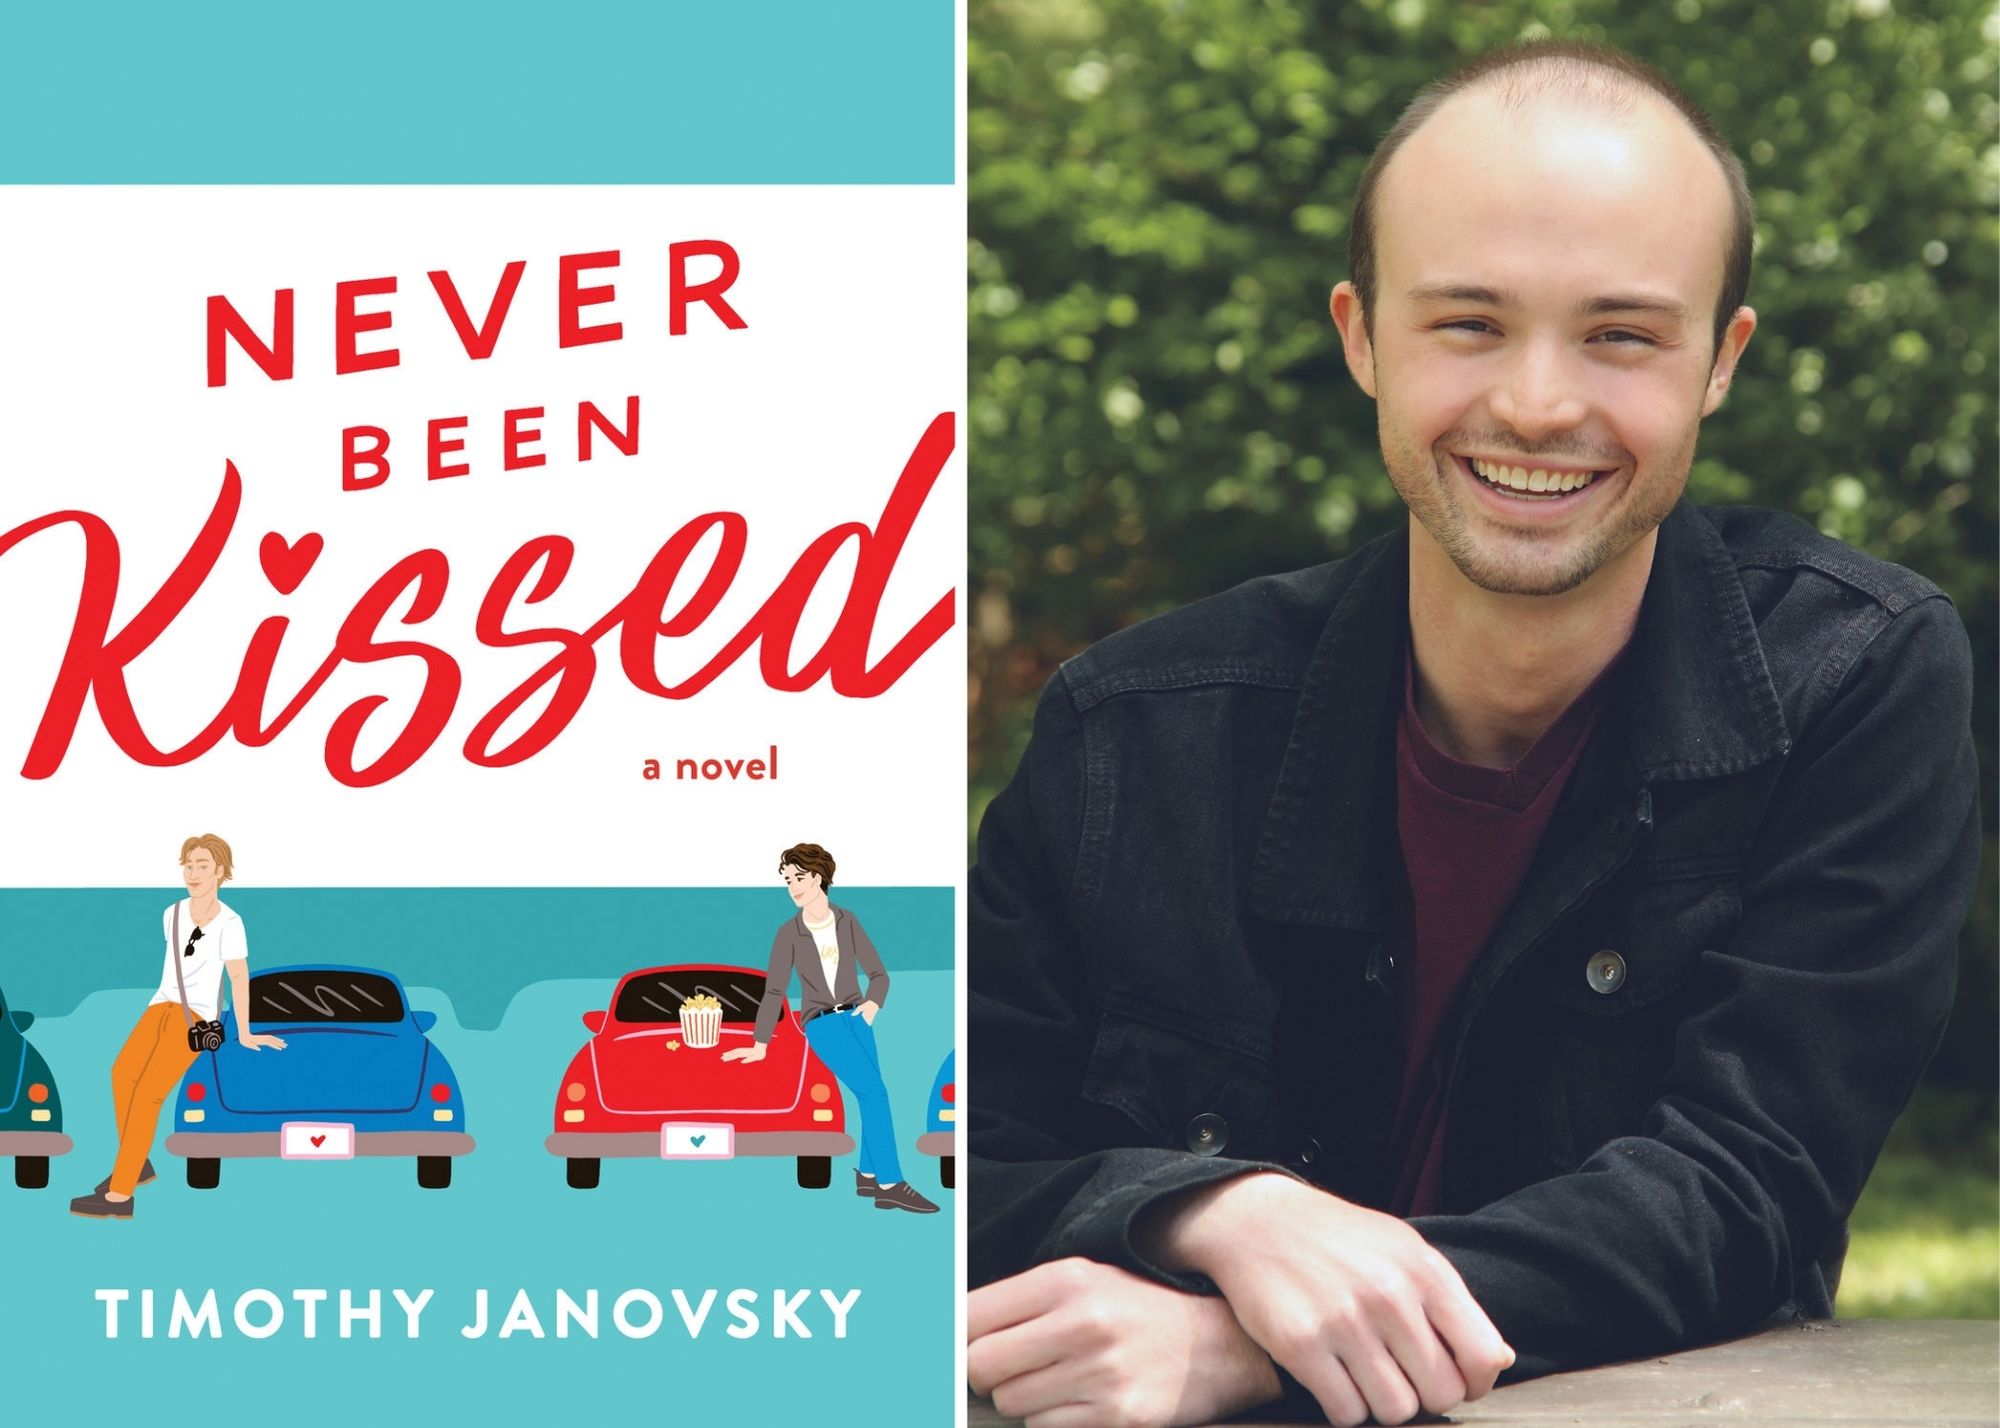 Never Been Kissed by Timothy Janovsky